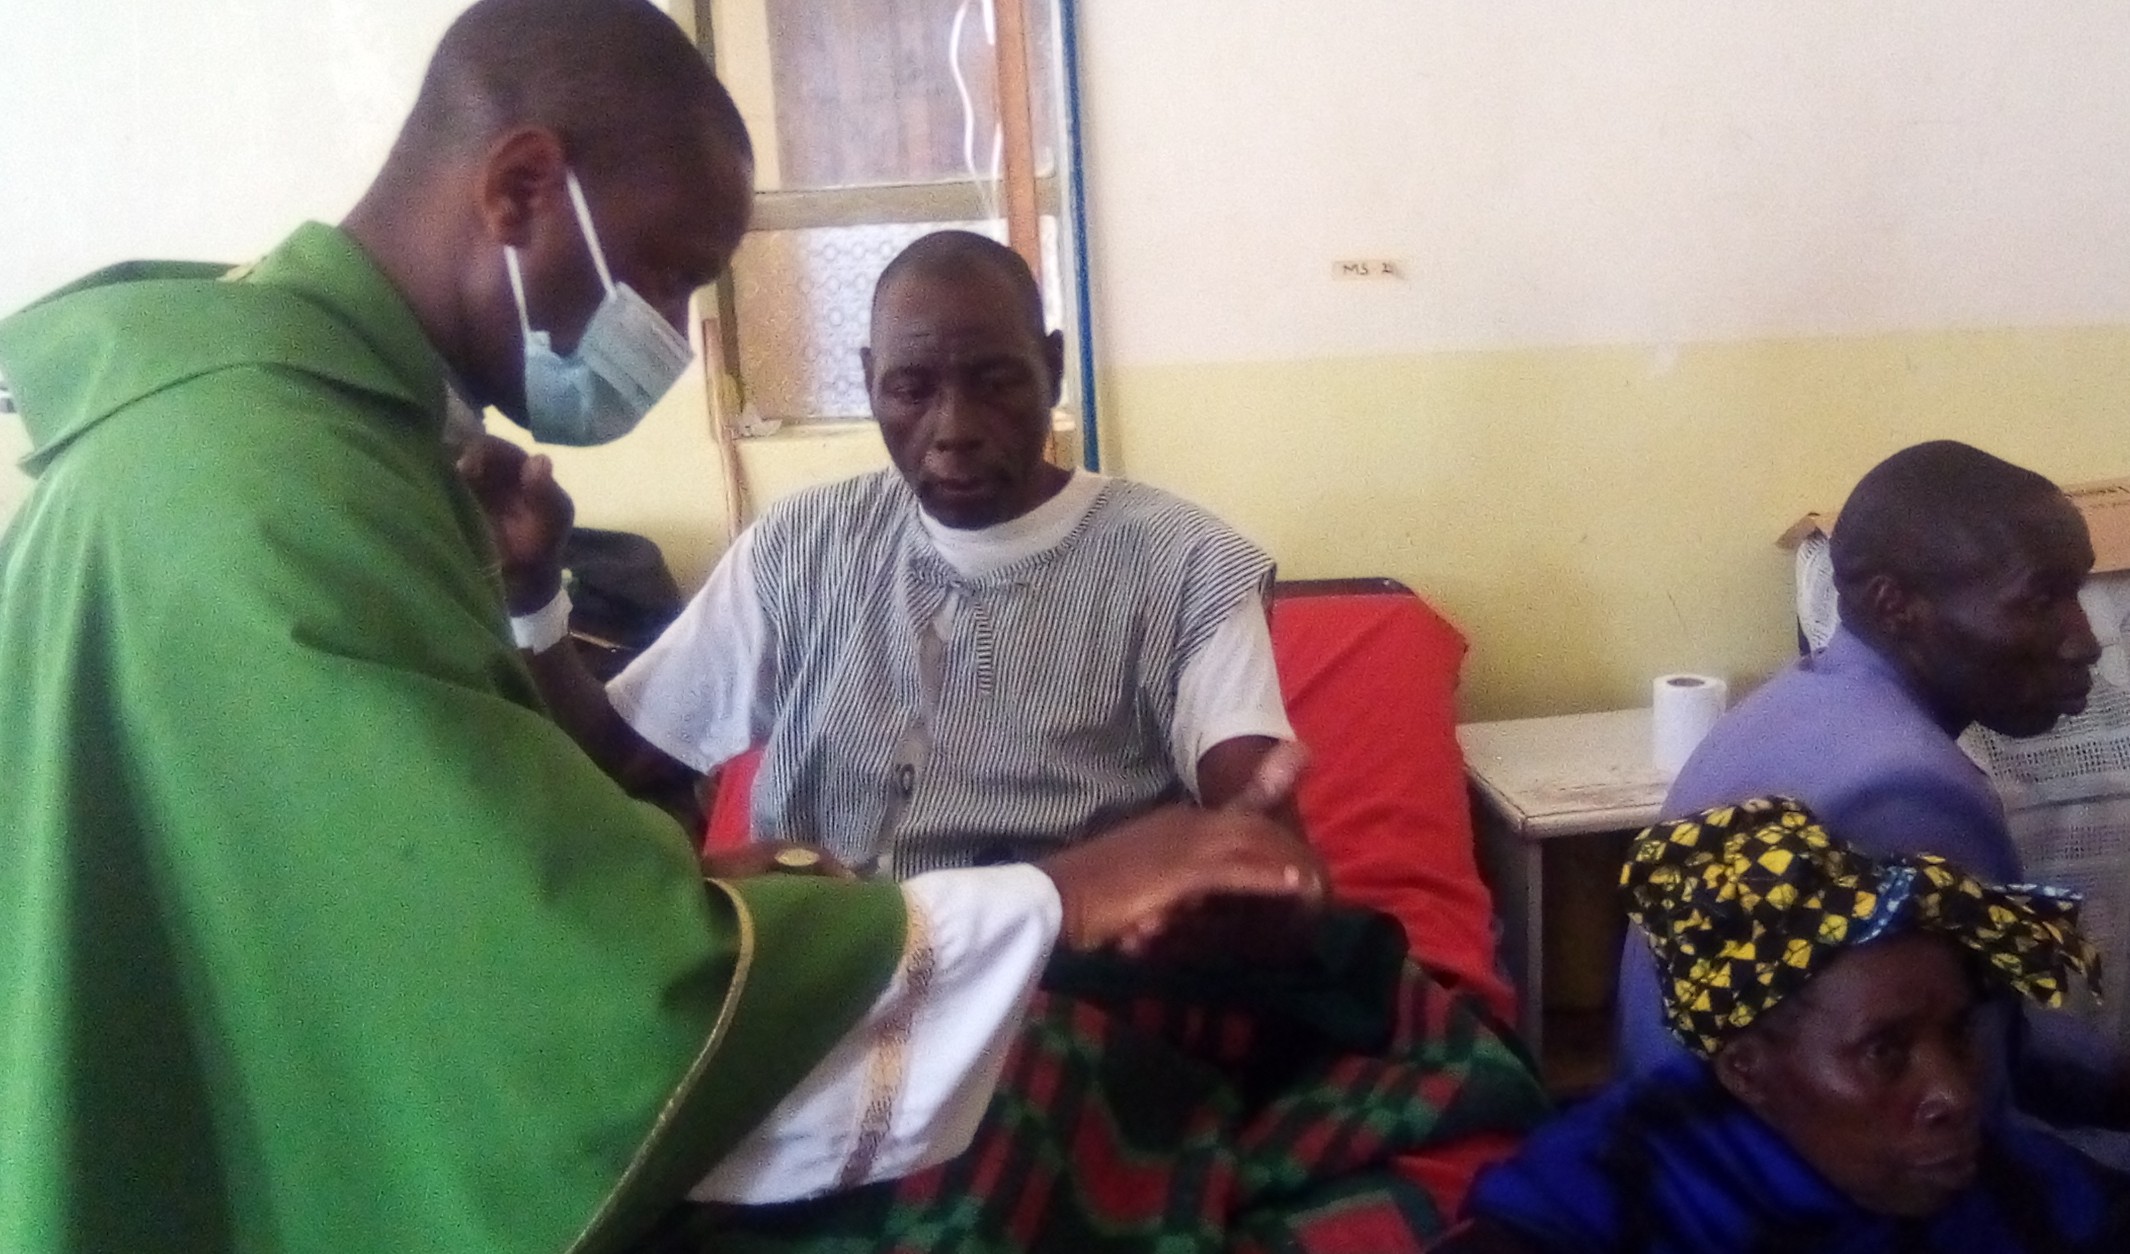 World day of the sick: St Joseph hospital Mutolere offers free medical service to over 300 locals